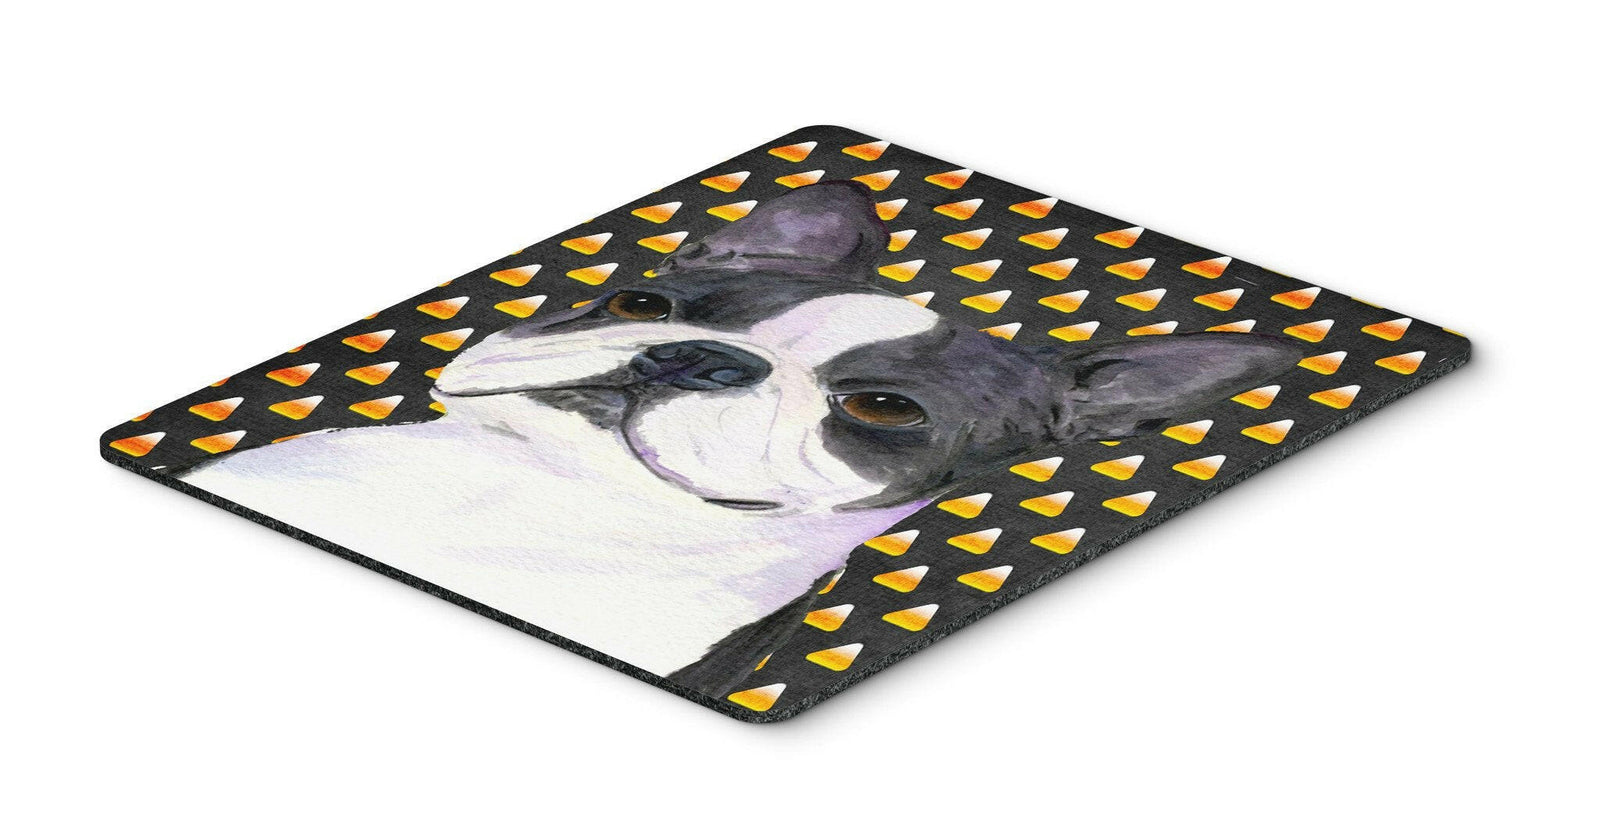 Boston Terrier Candy Corn Halloween Portrait Mouse Pad, Hot Pad or Trivet by Caroline's Treasures